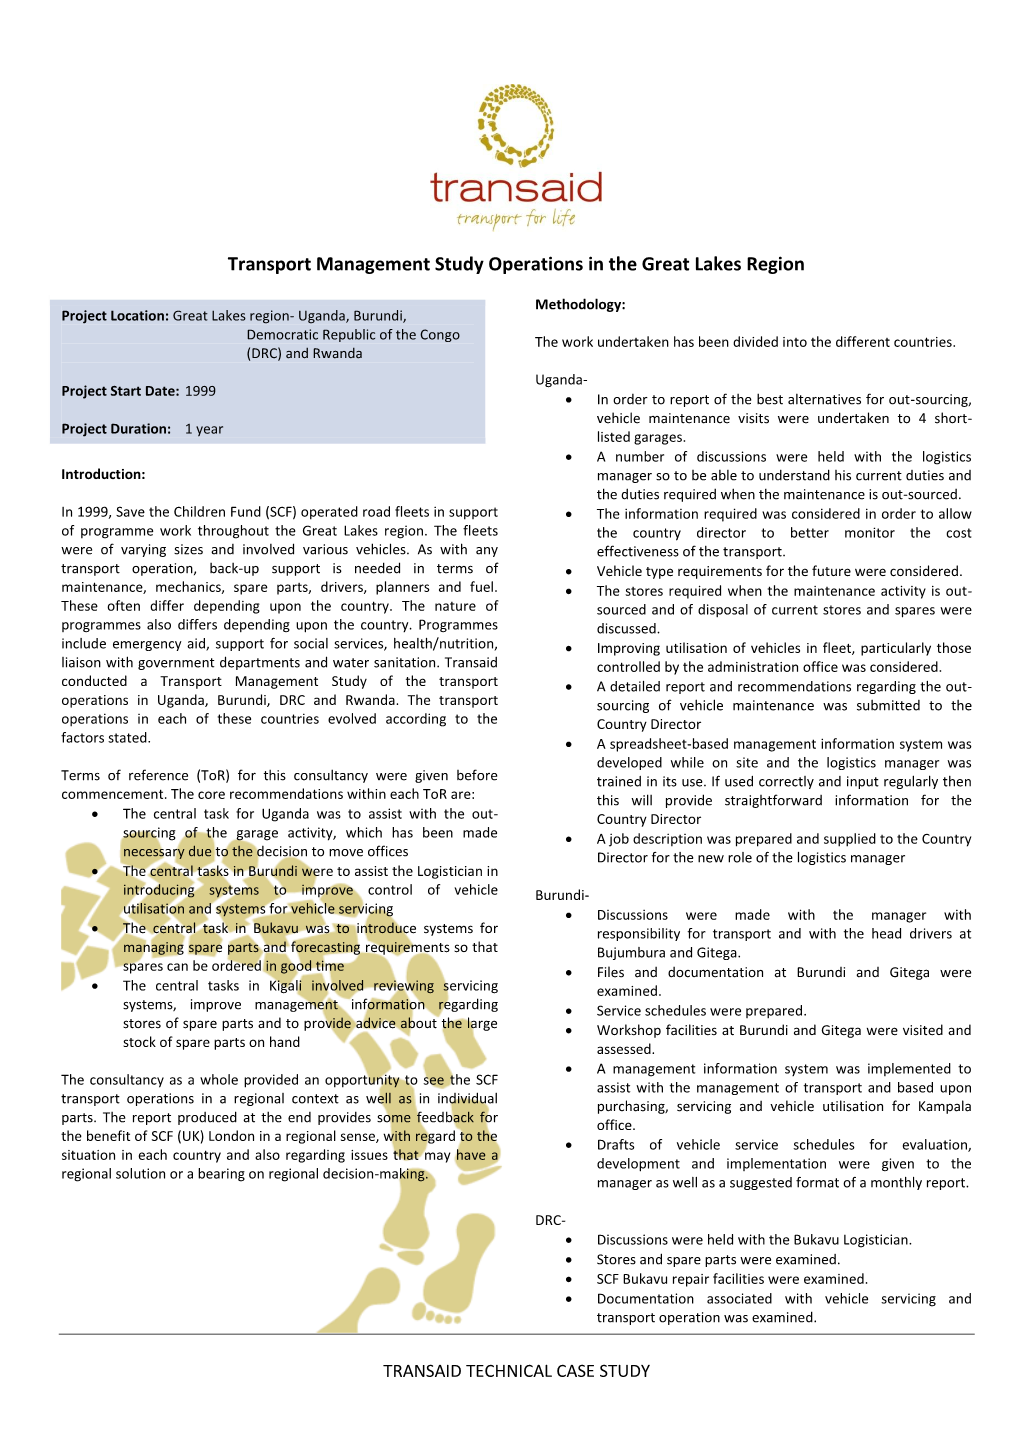 Transport Management Study Operations in the Great Lakes Region